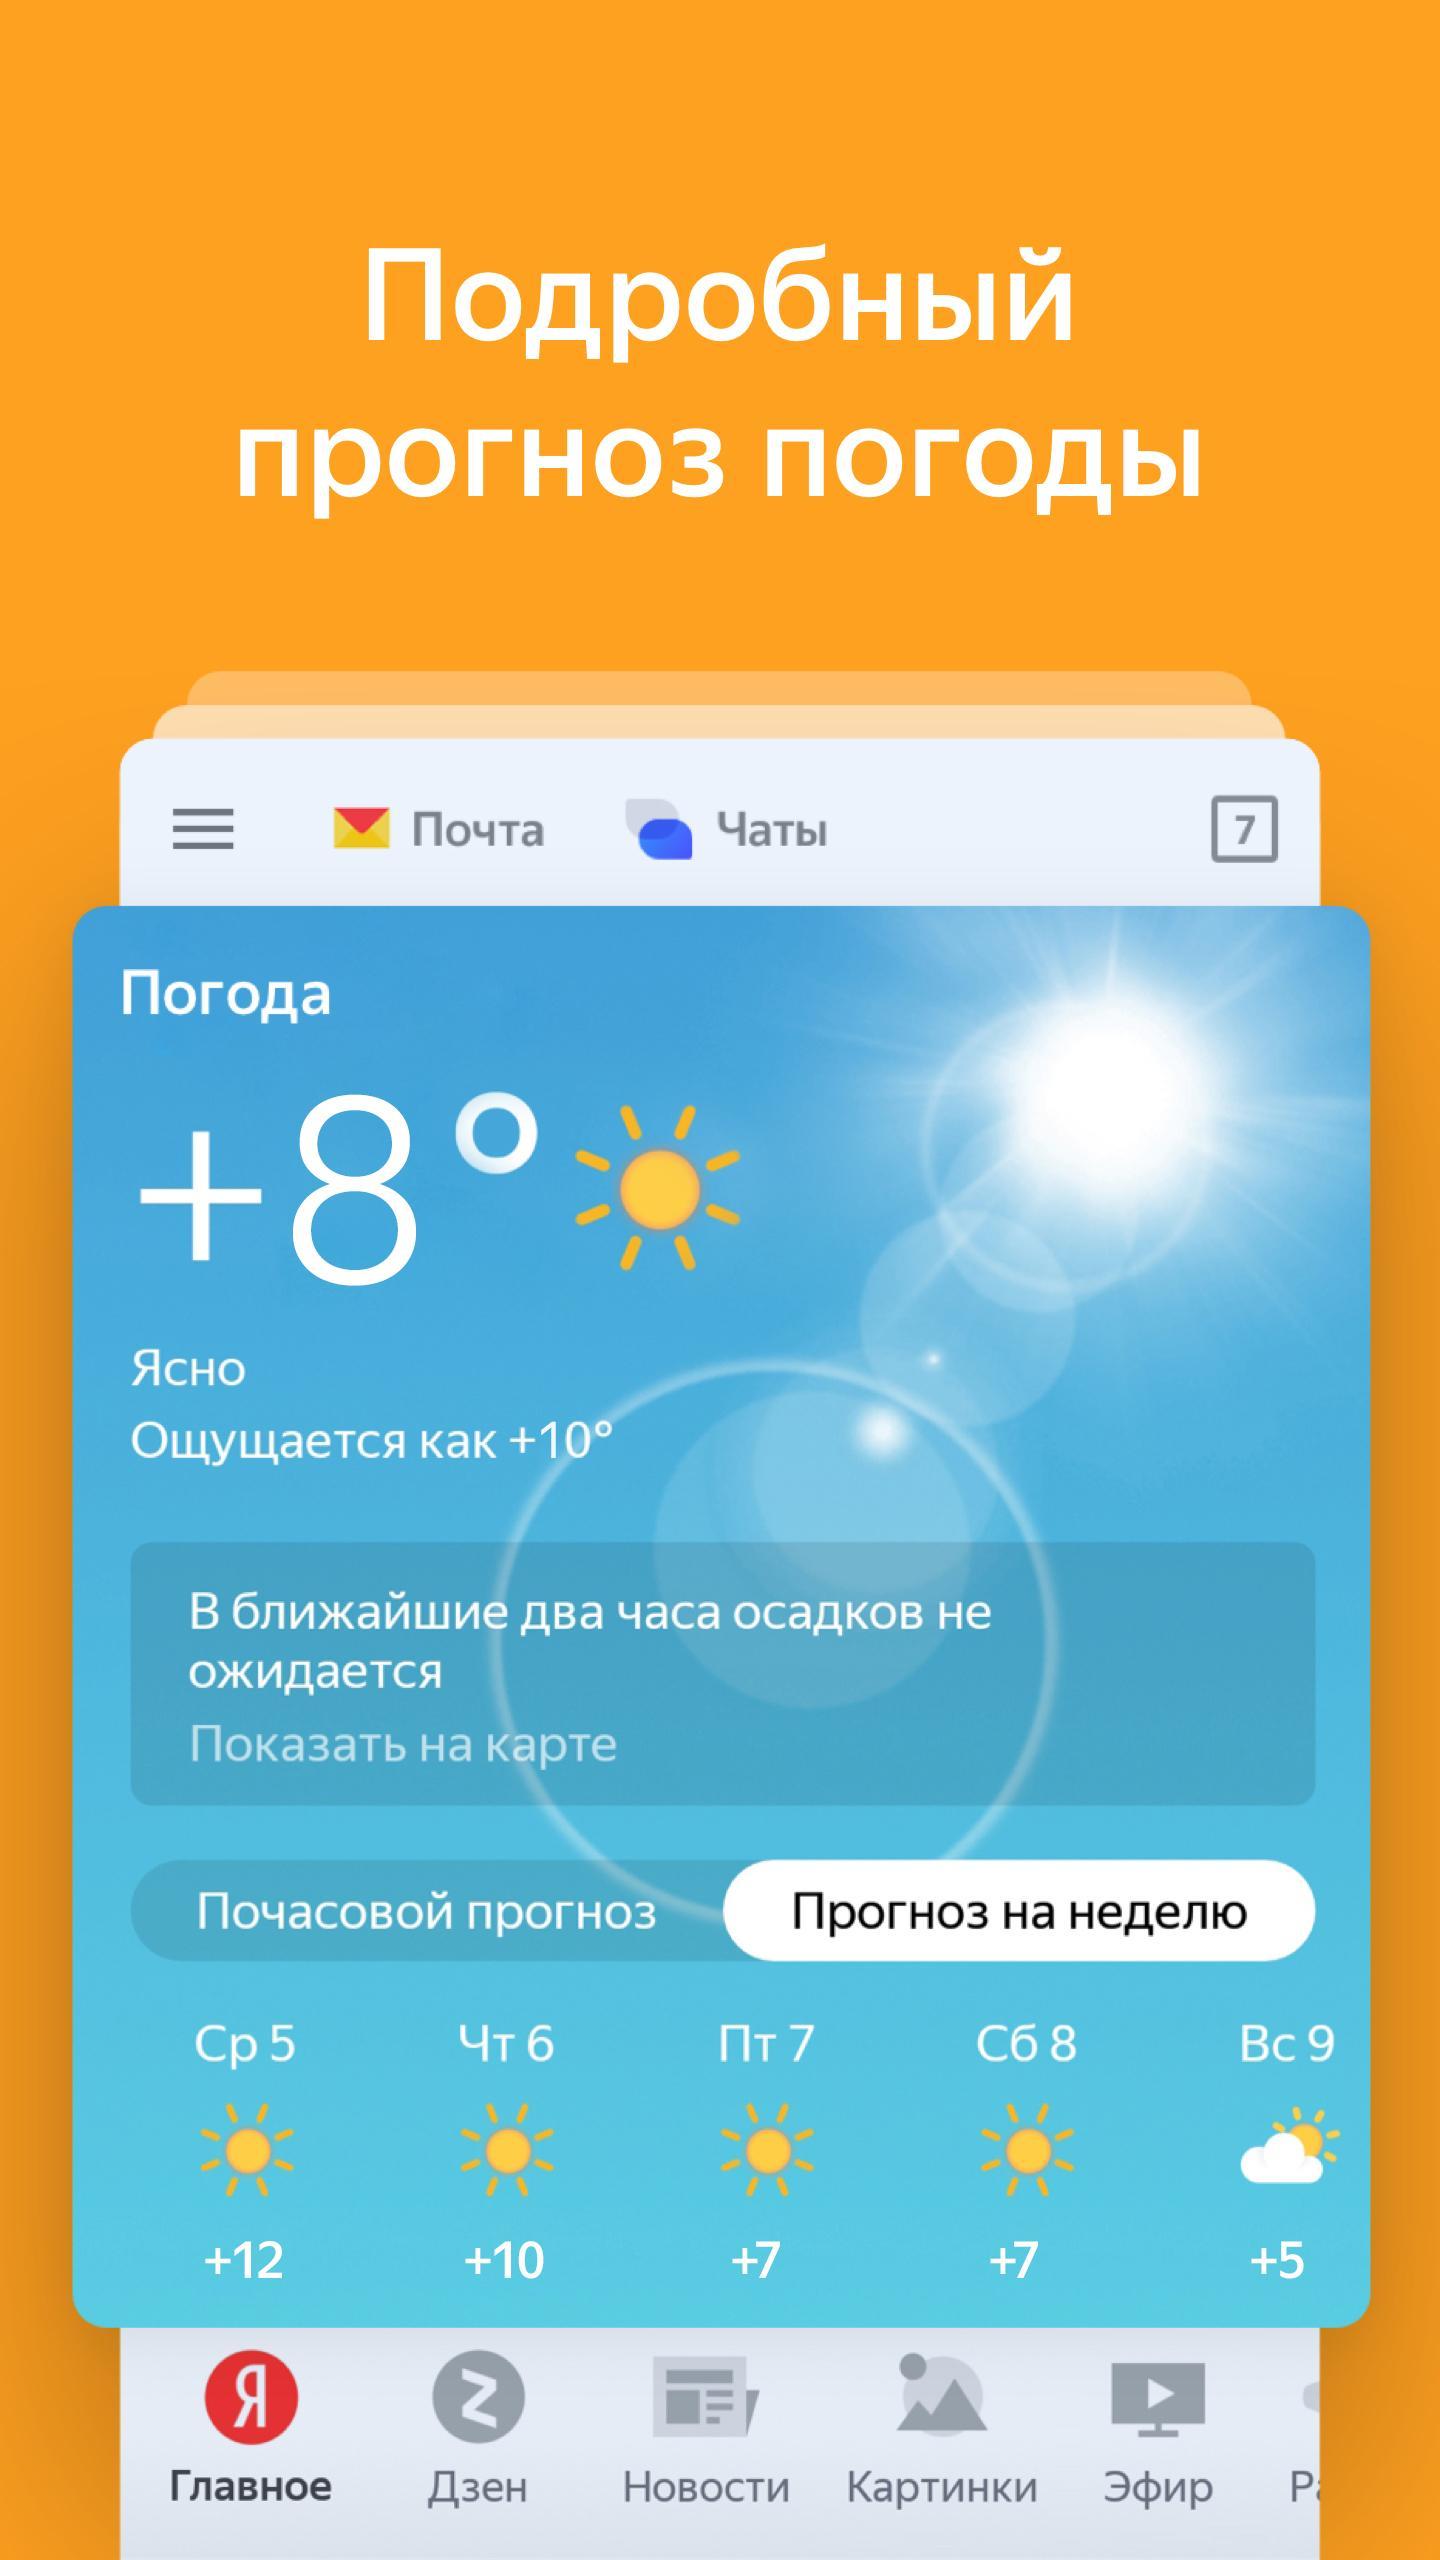 Yandex for Android - APK Download